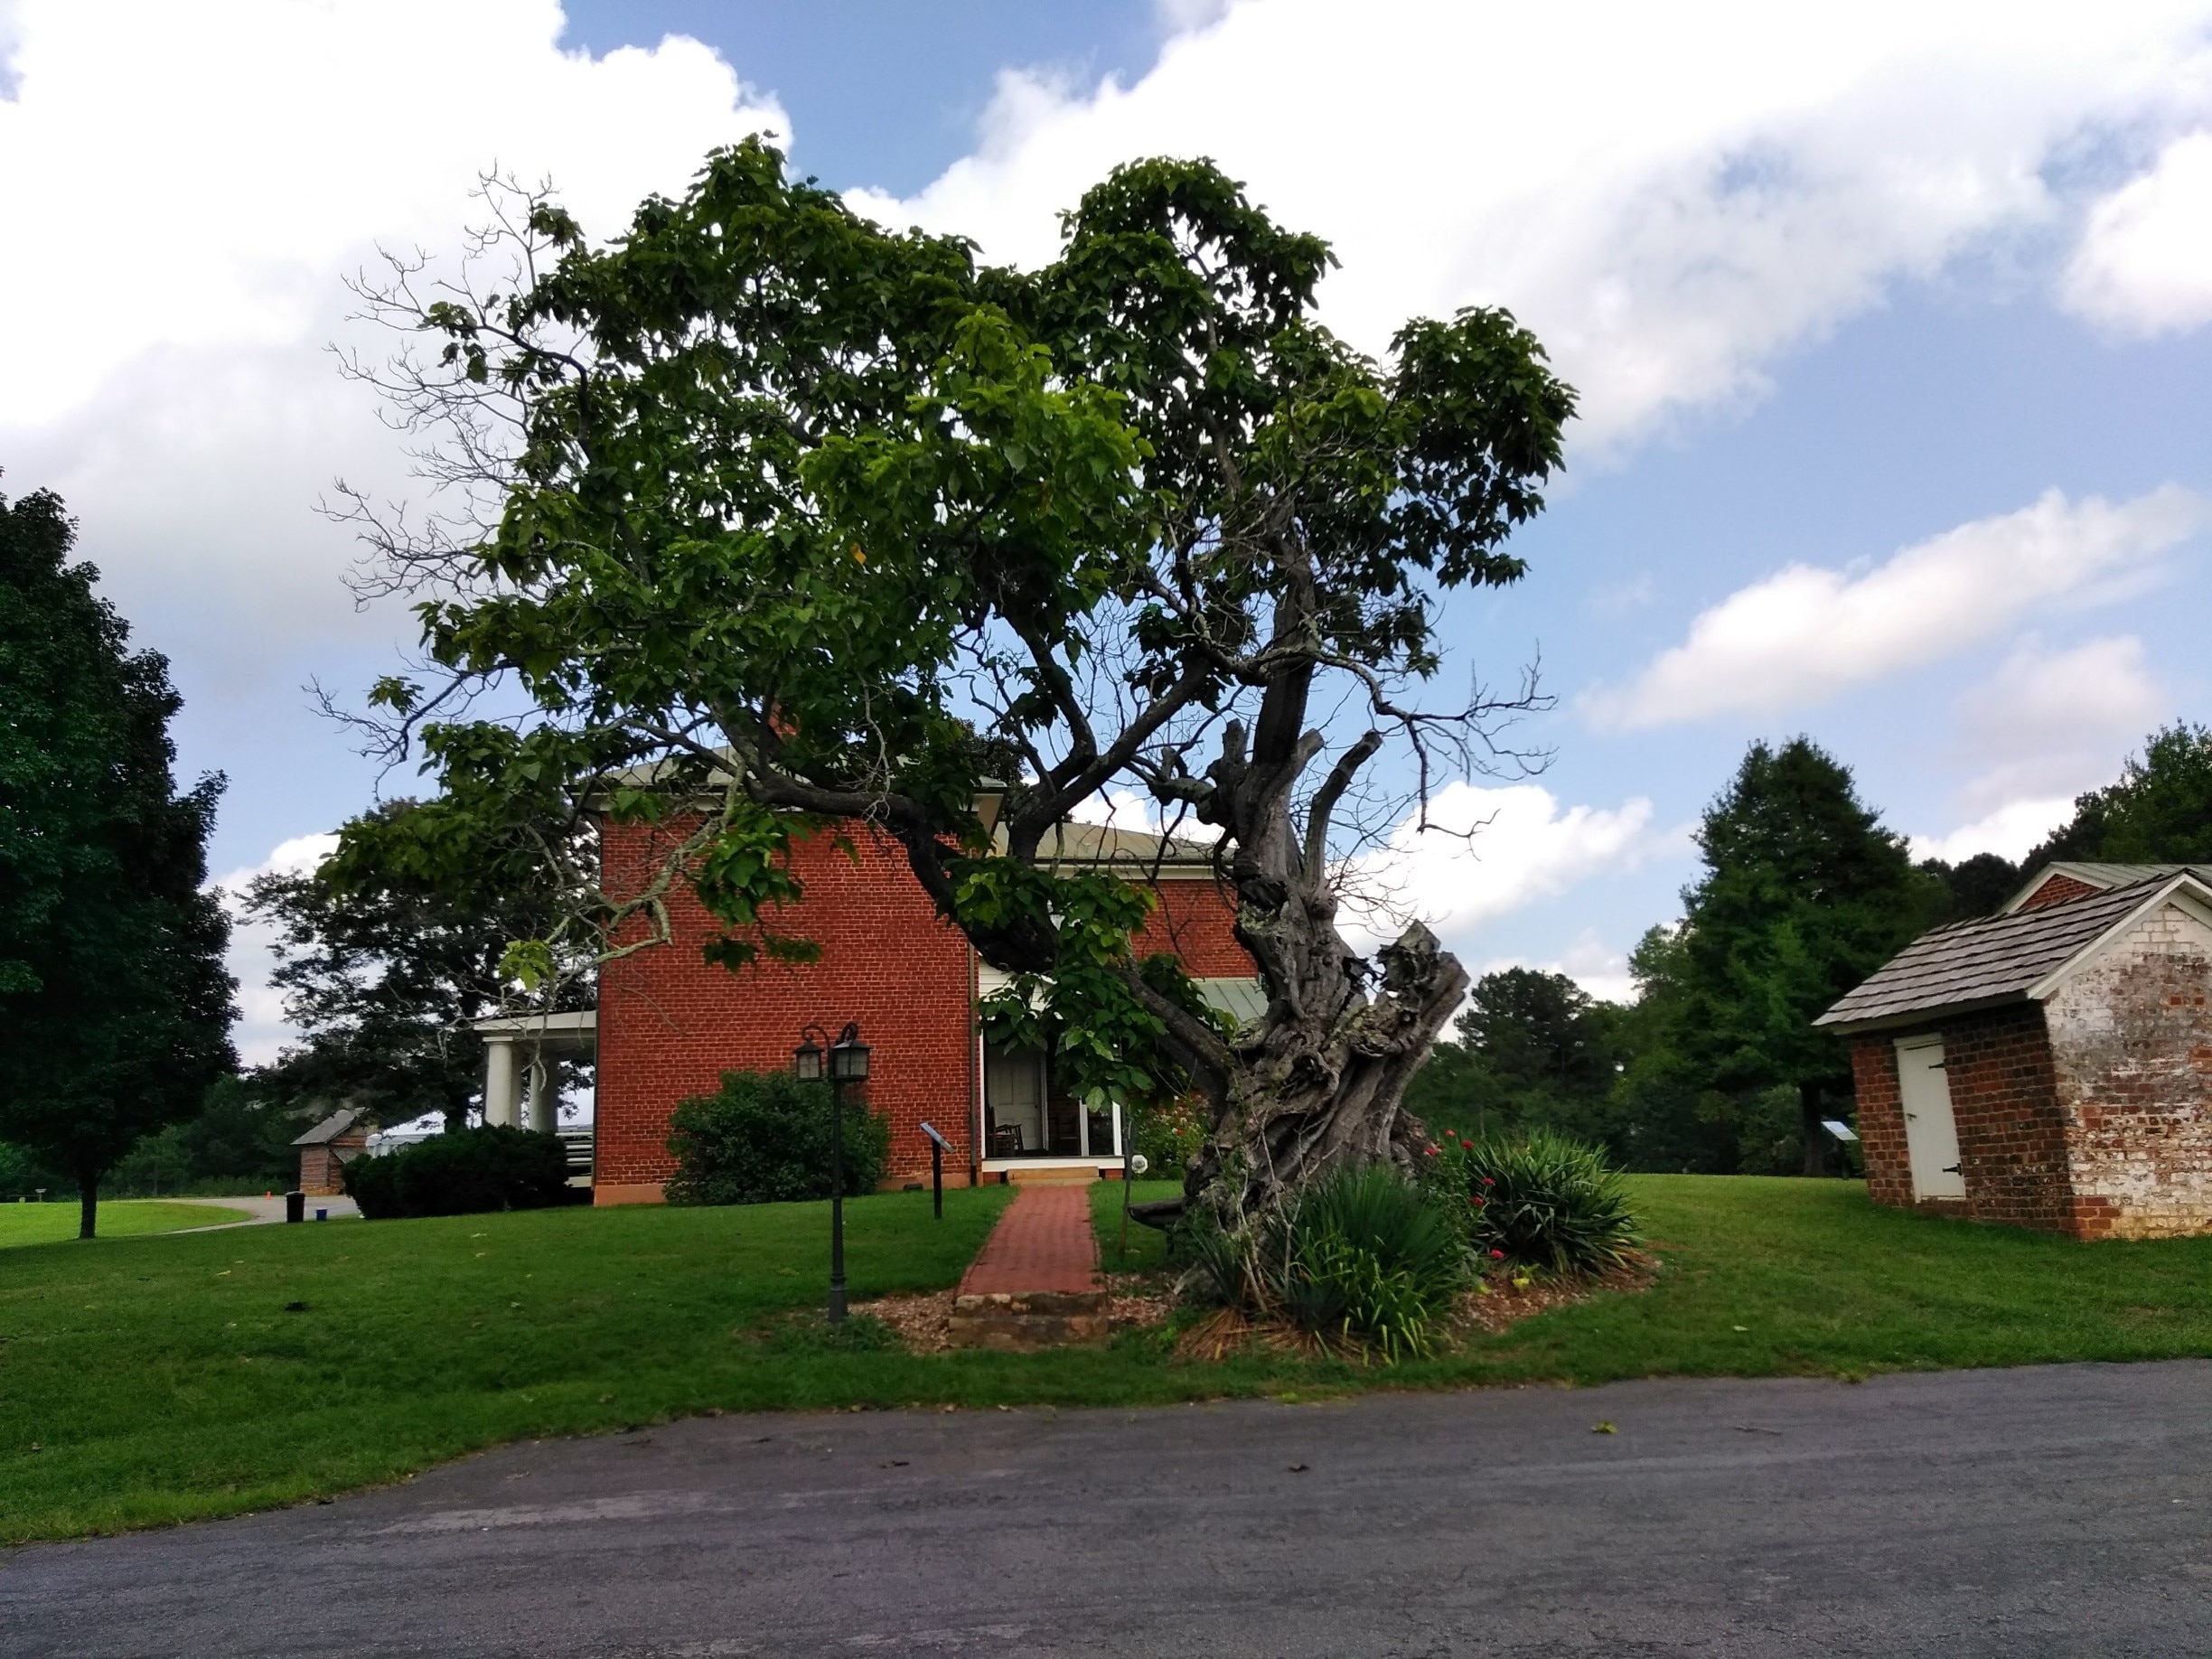 The Reynolds Homestead, built in 1943 is in a beautiful foothill setting. Hardin Reynolds and his wife produced 16 children here, the most famous being RJ Reynolds who migrated to Winston Salem, NC to start the tobacco empire of the same name. The catalpa tree in the foreground still remains from the earliest days of the homestead.